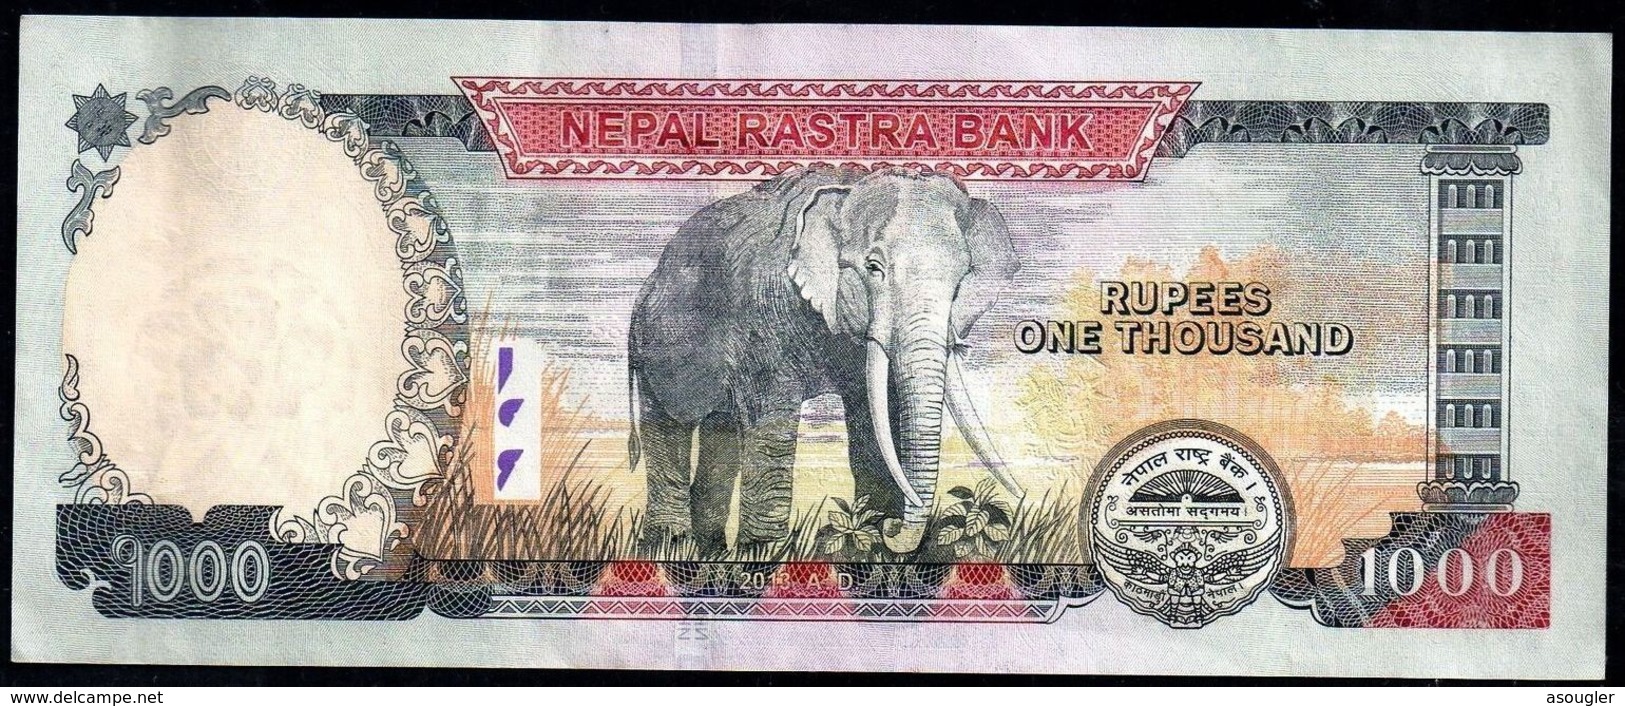 NEPAL 1000 RUPEES 2013 VF-EXF P-75a "free Shipping Via Regular Air Mail.(buyer Risk)" - Nepal